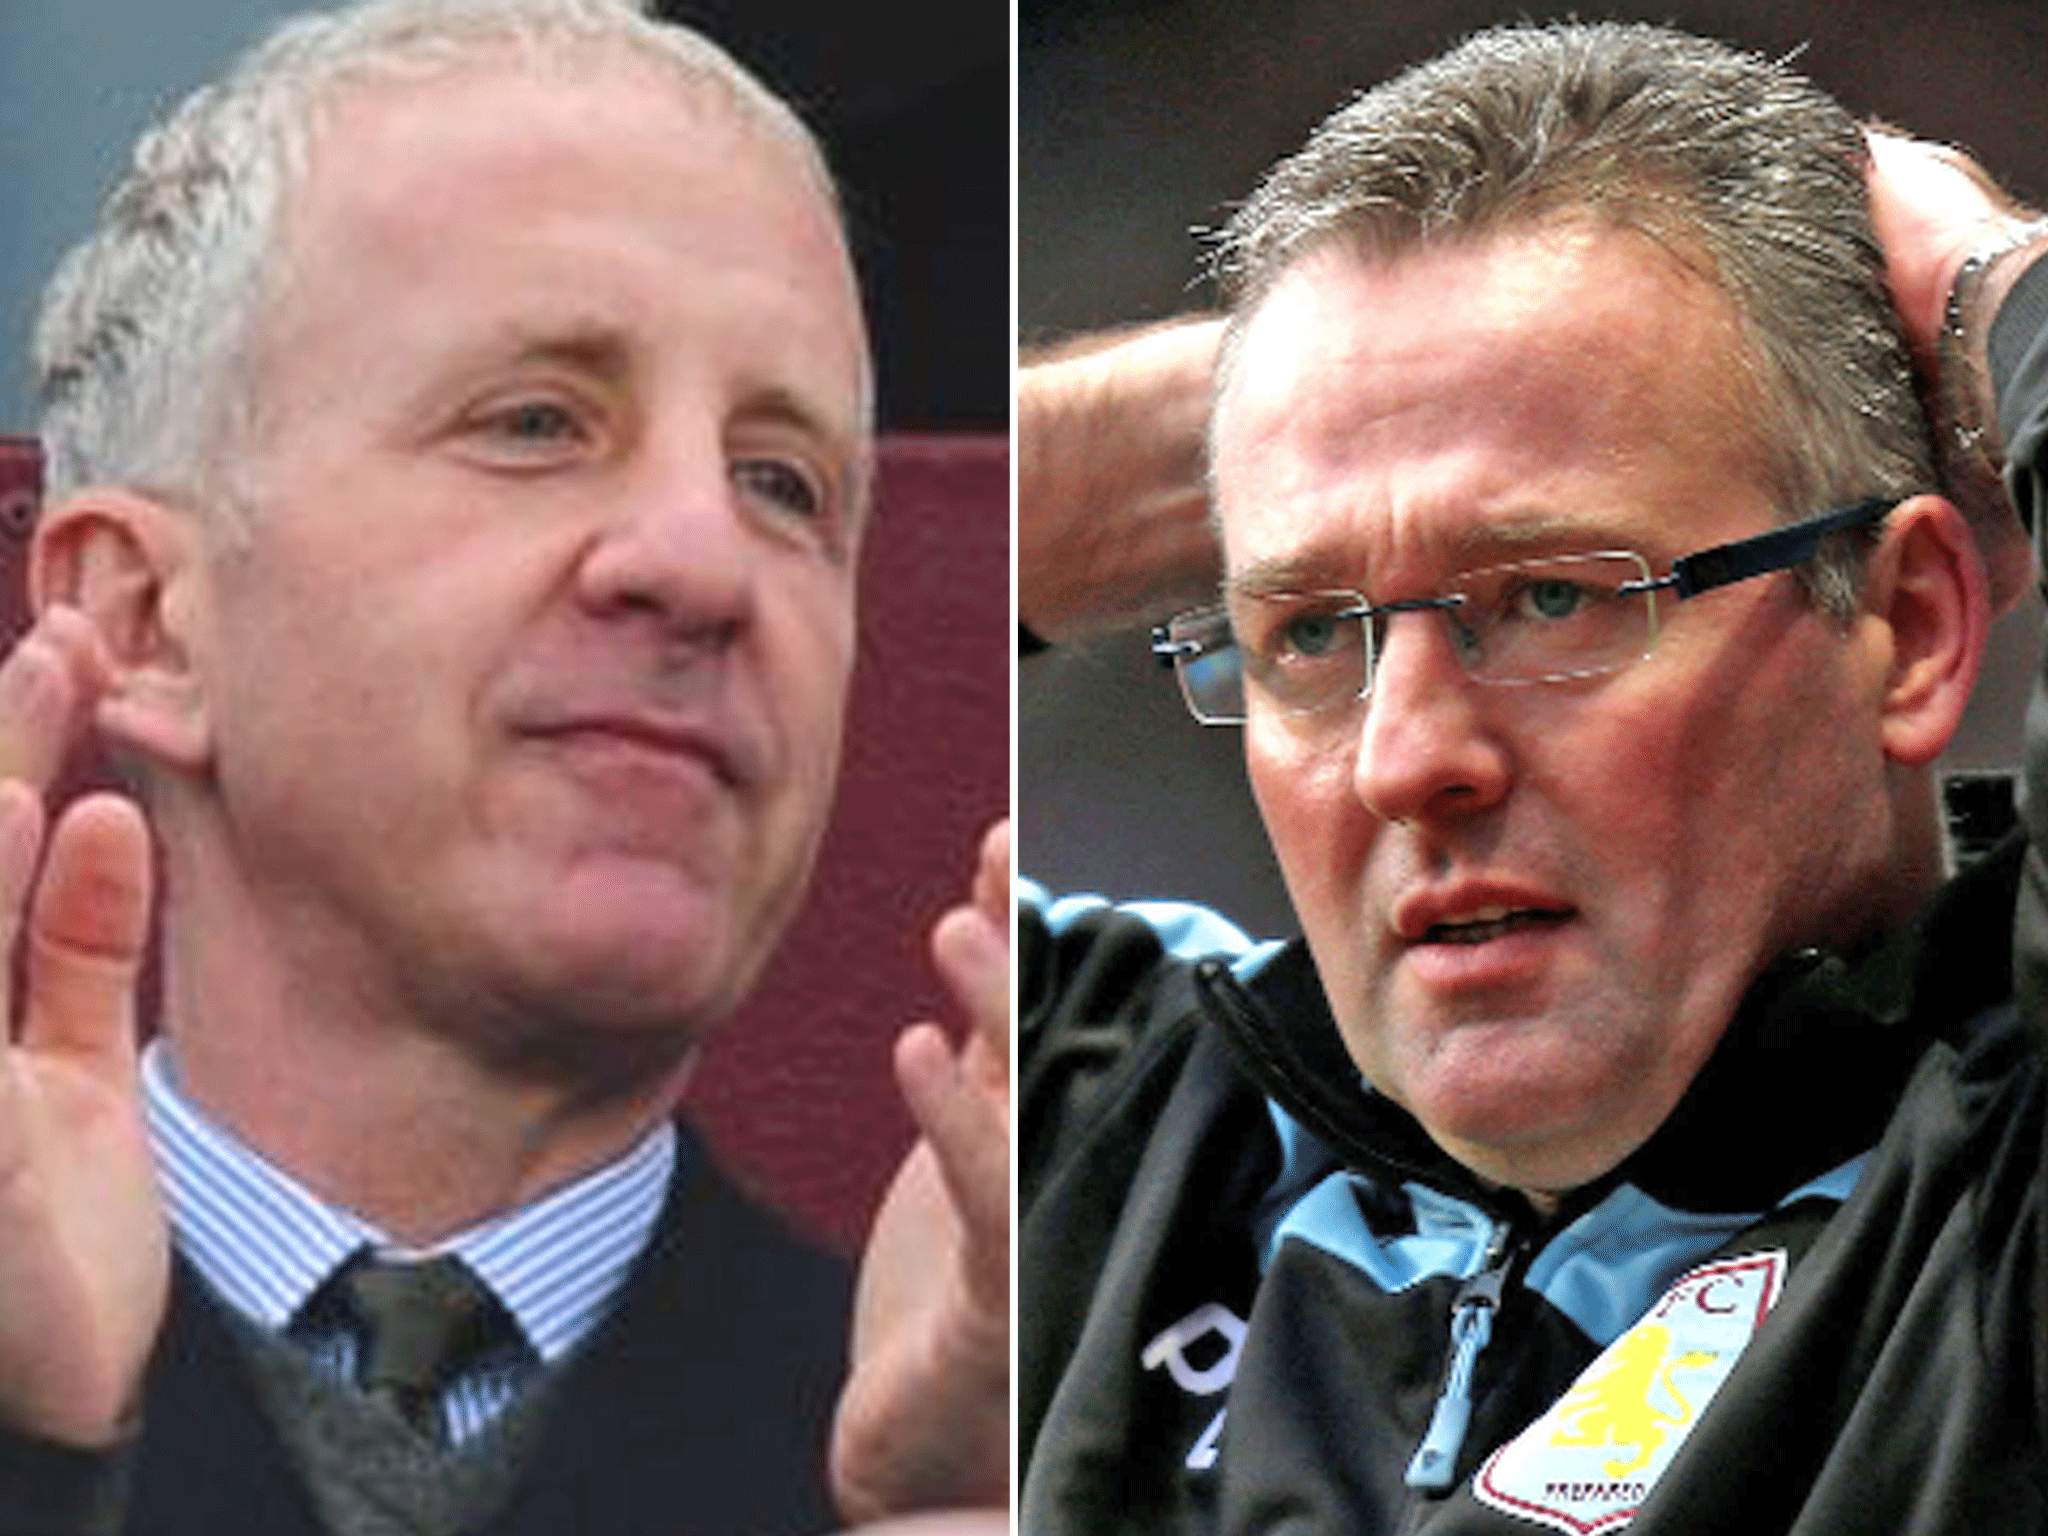 Aston Villa owner Randy Lerner (left) has reiterated his support for manager Paul Lambert ahead of tomorrow's crunch Barclays Premier League clash with fellow strugglers Newcastle